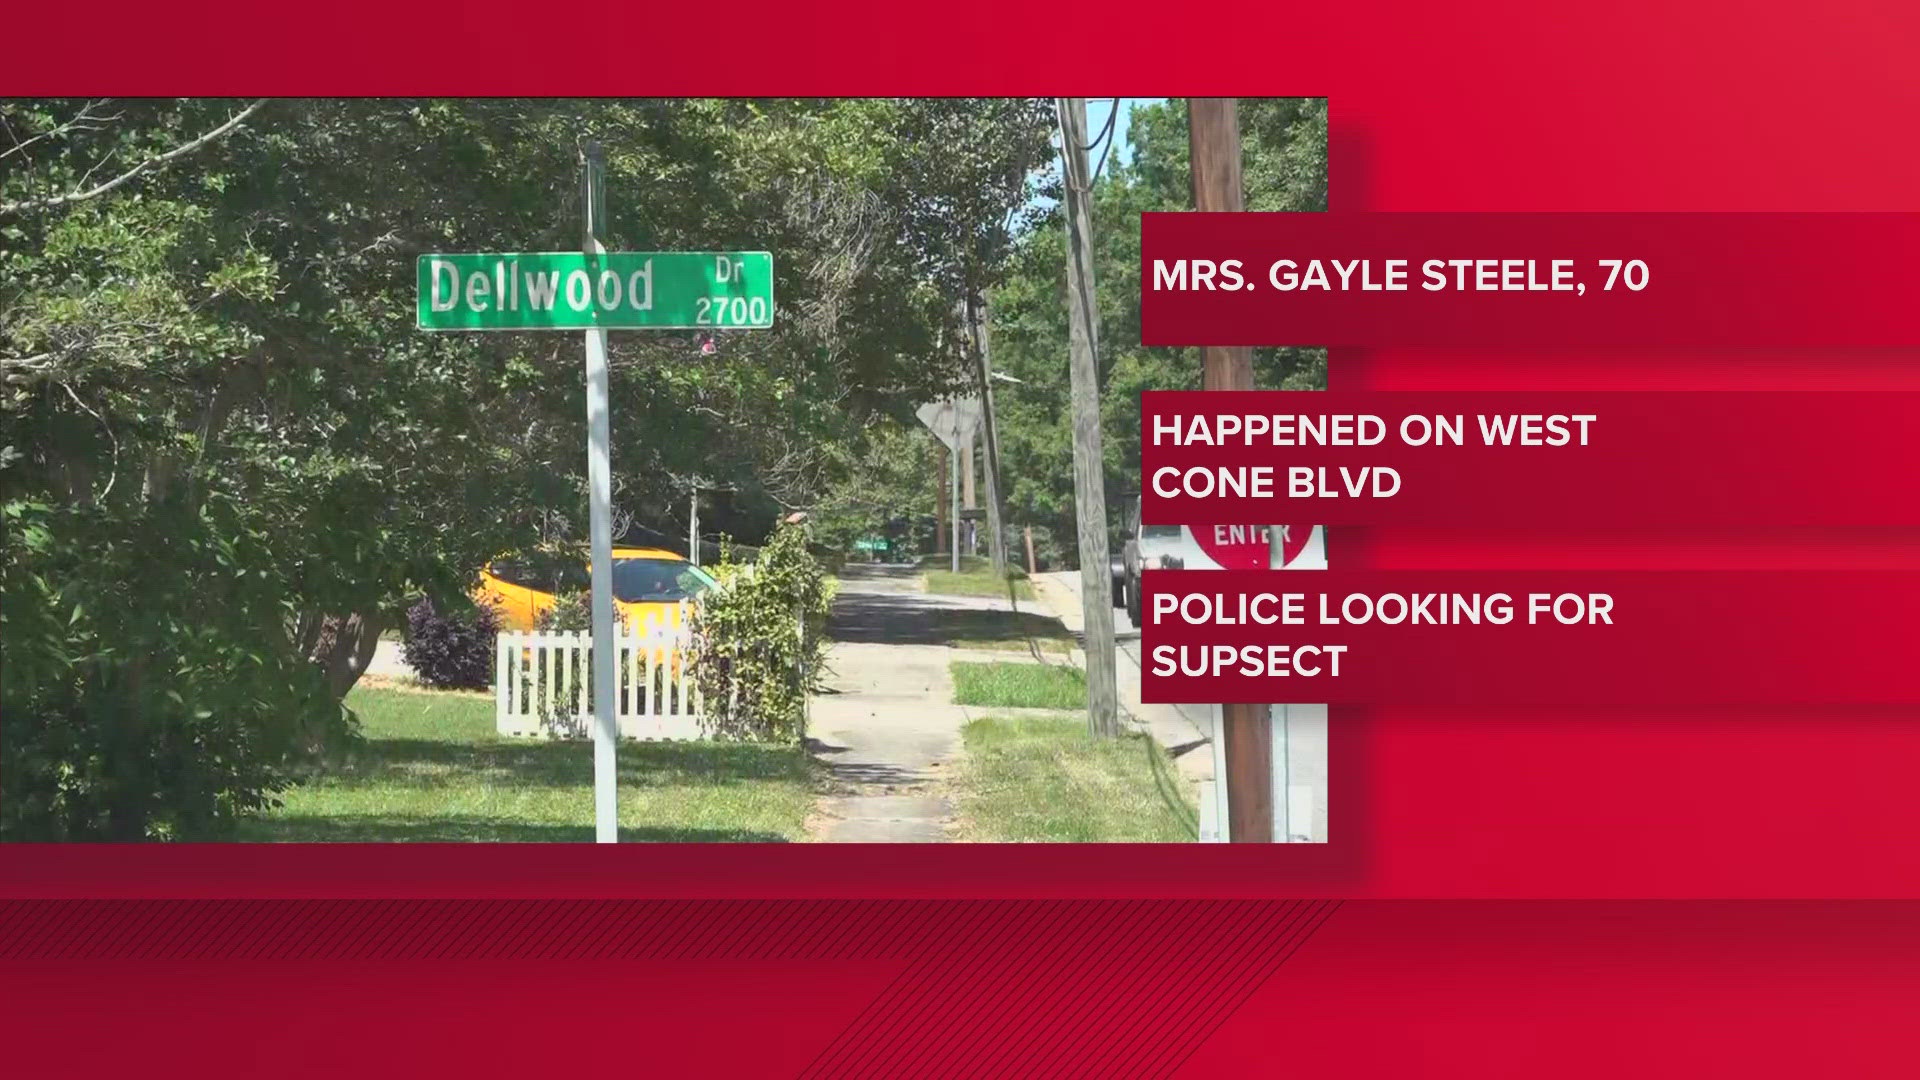 The victim has been identified as 70-year-old Gayle Steele.